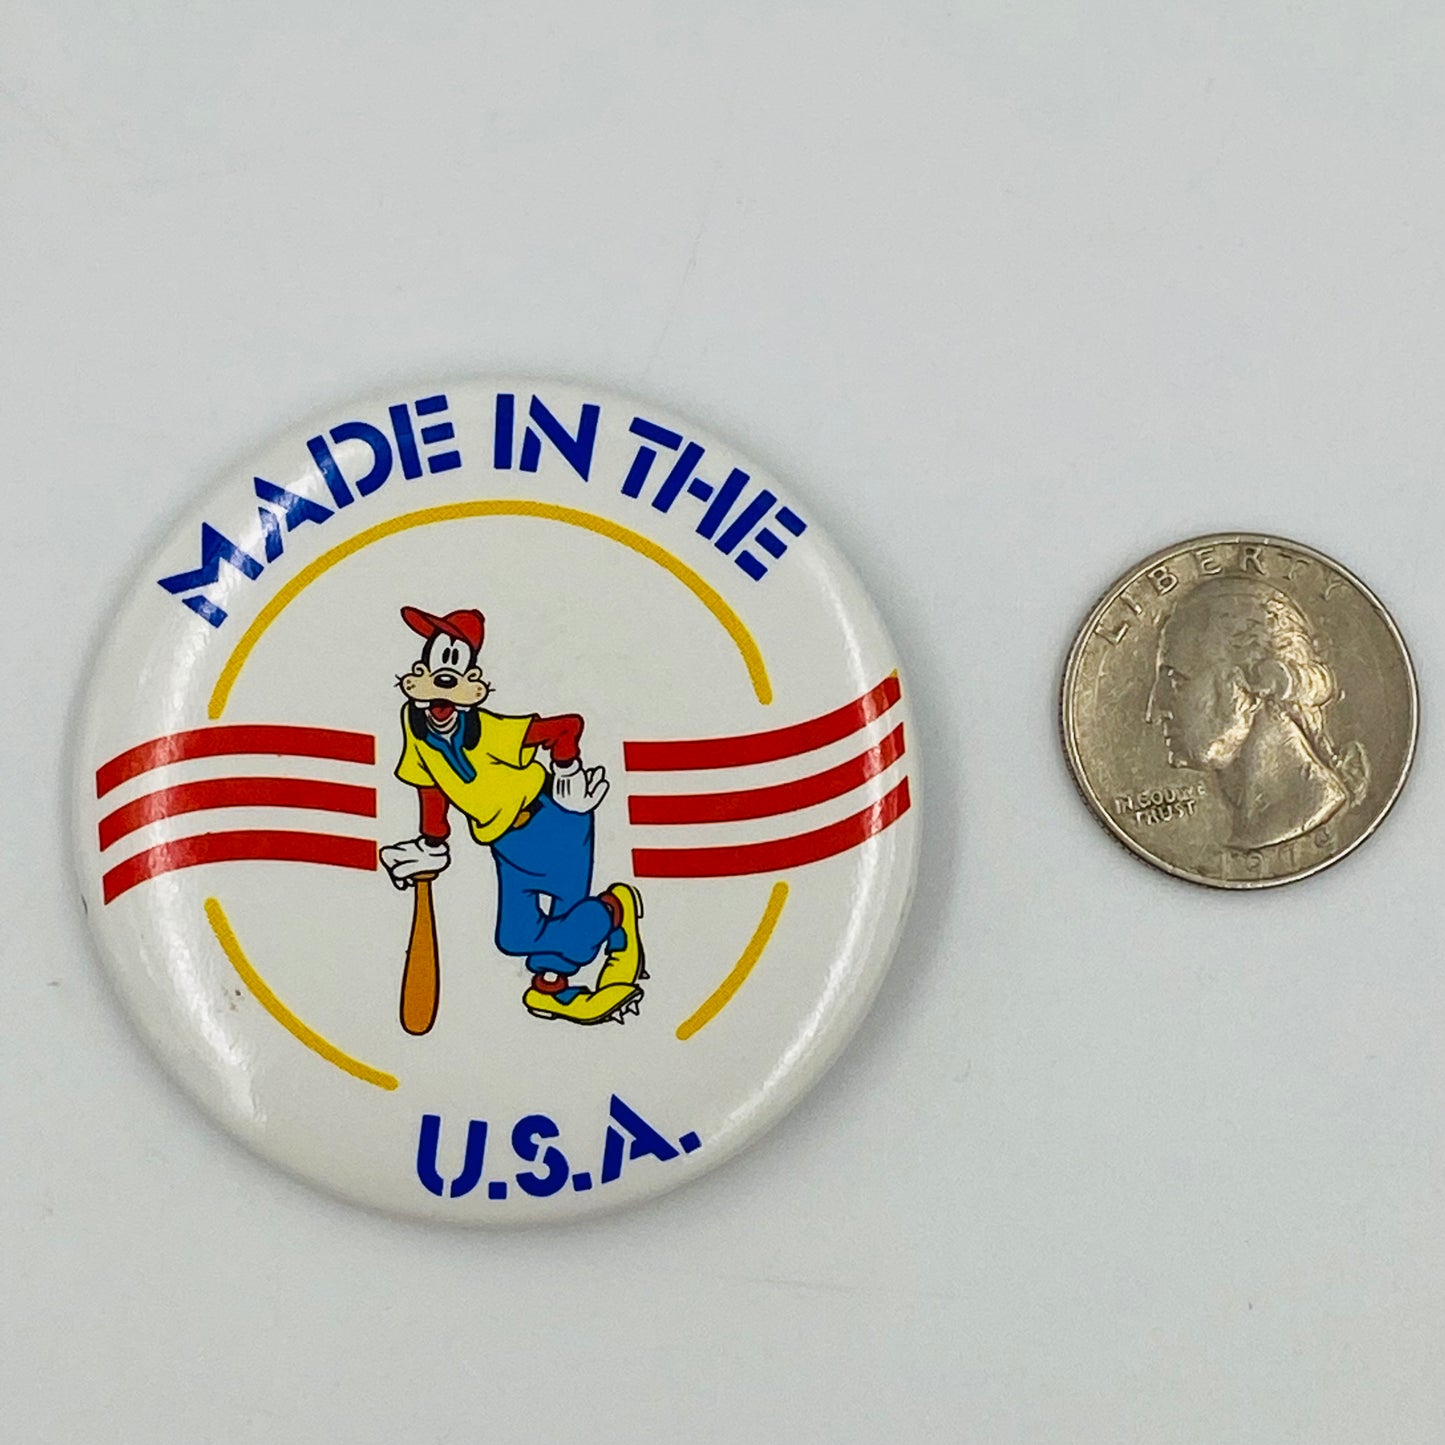 Goofy Made in the U.S.A. pinback button (1986)